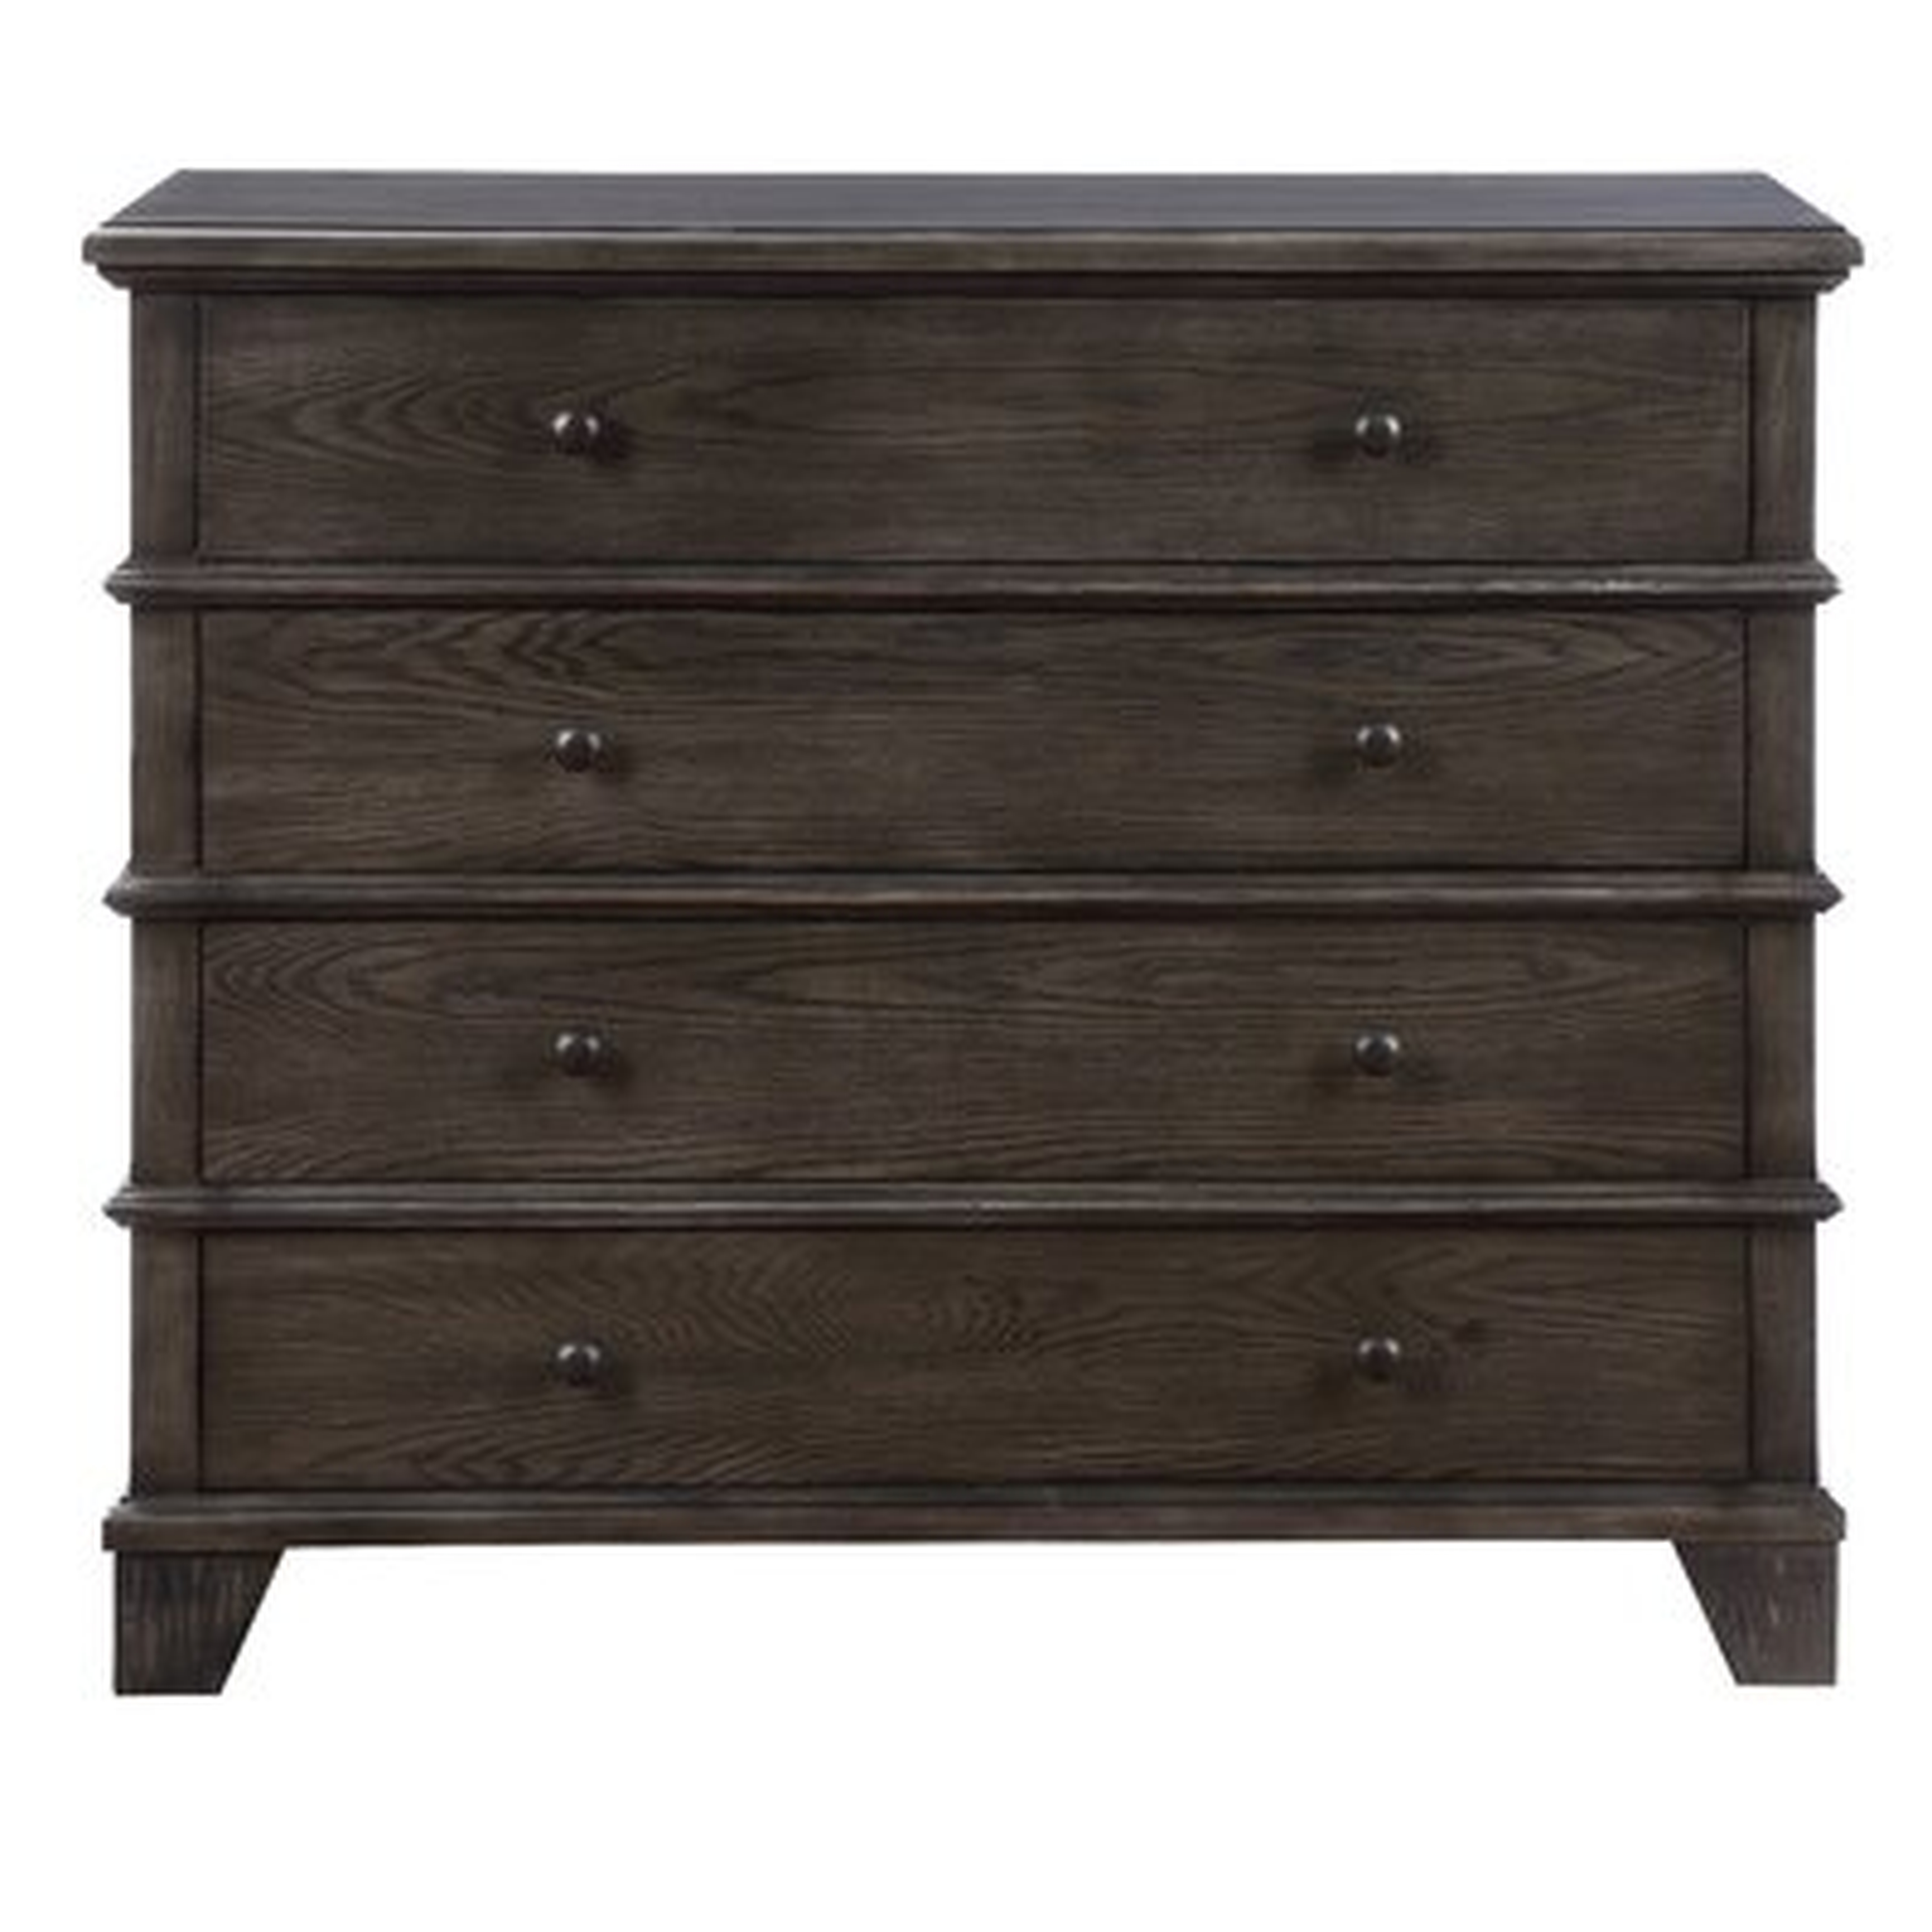 Sheehy 4 Drawer Accent Chest - Wayfair